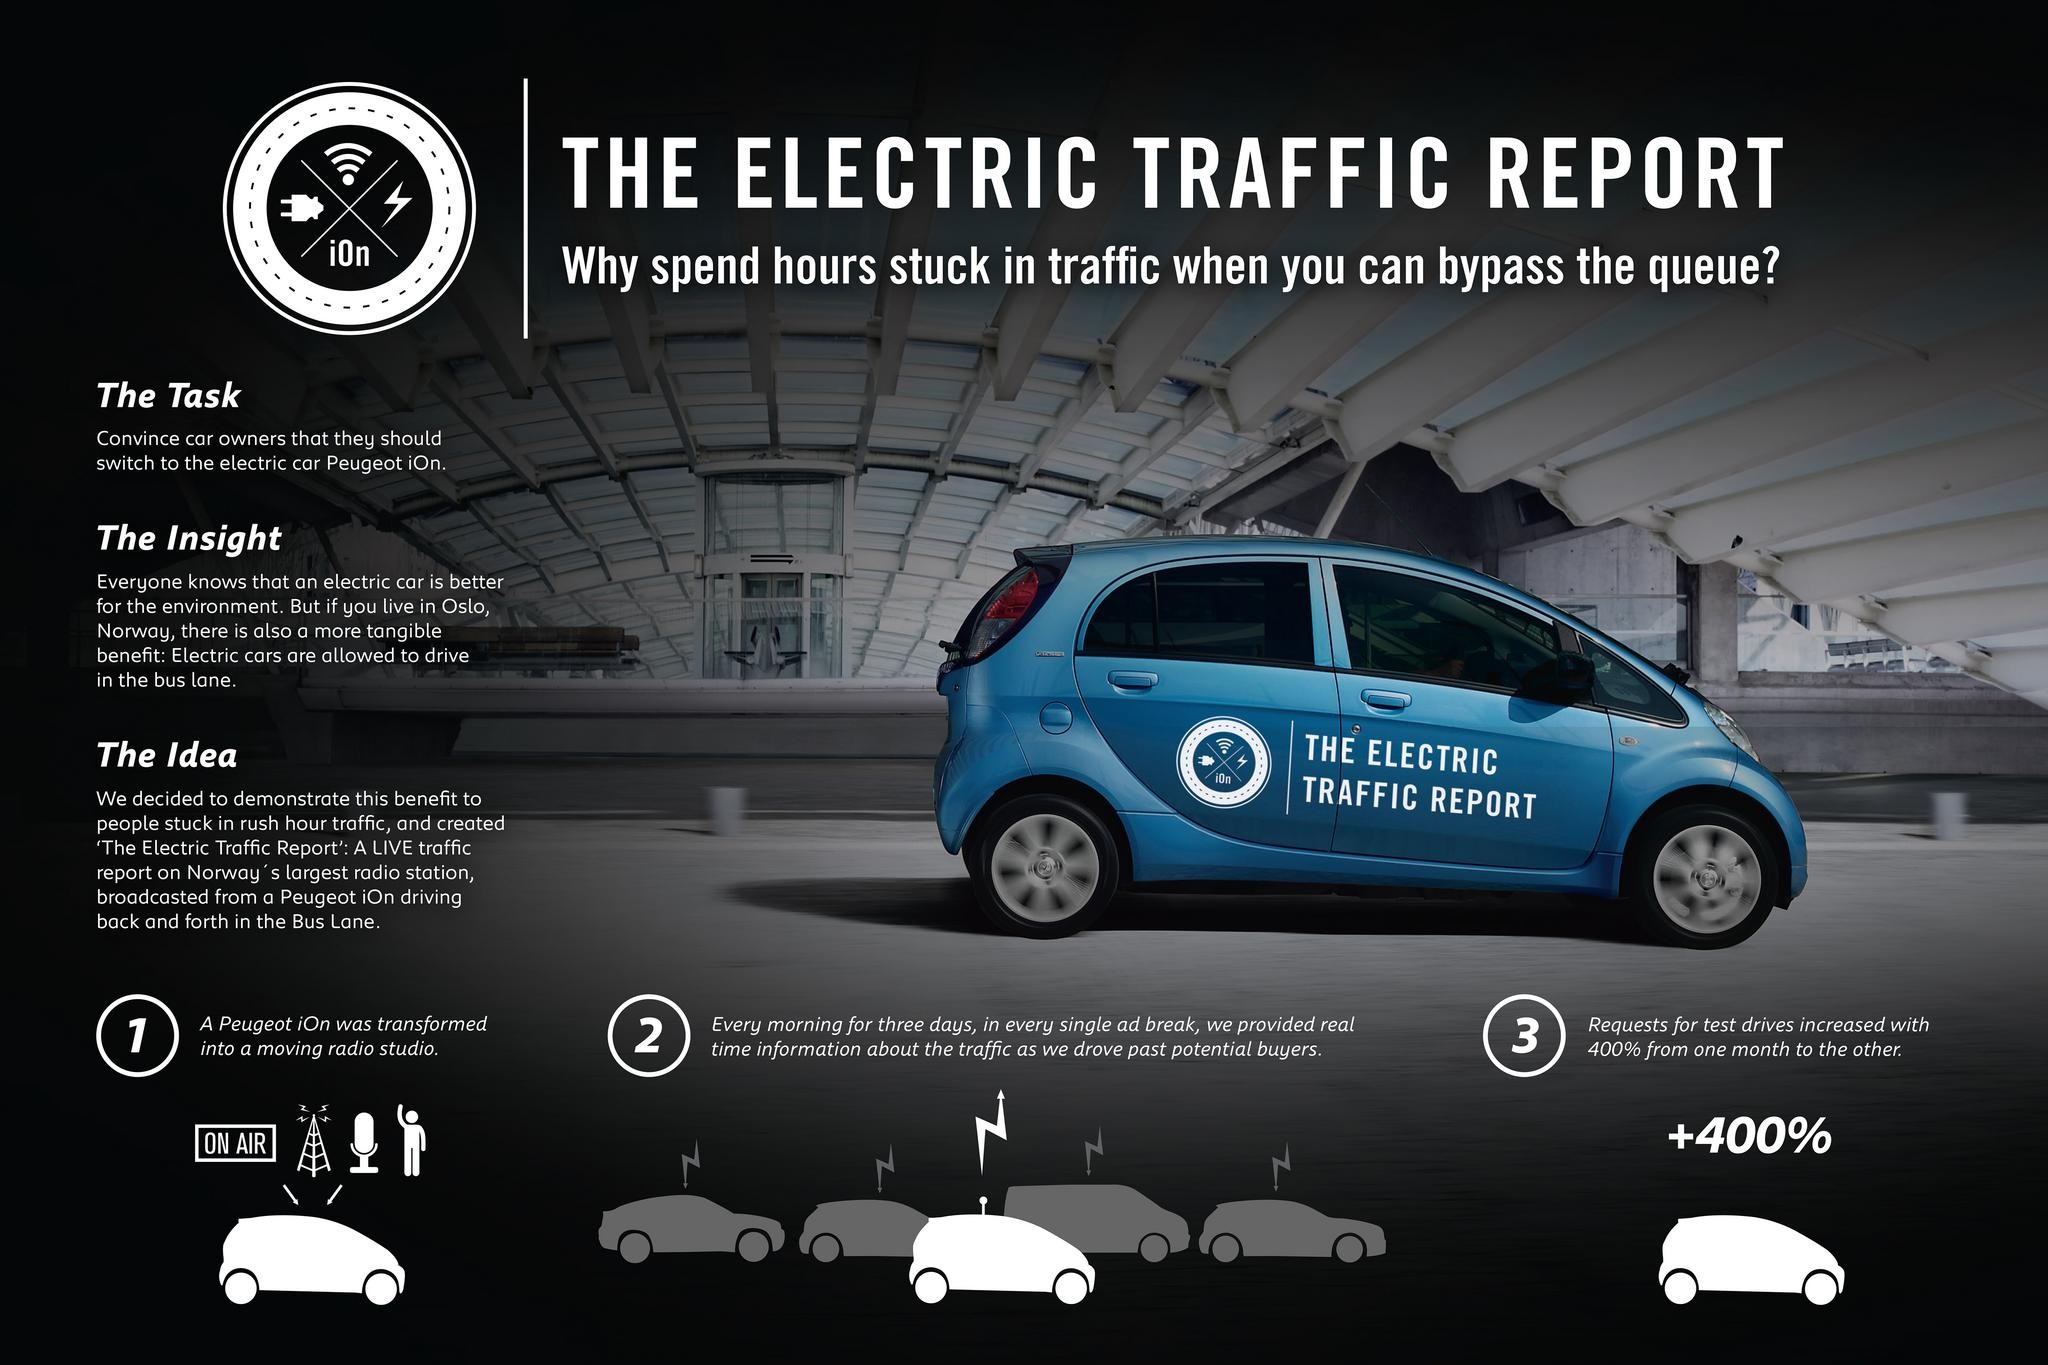 THE ELECTRIC TRAFFIC REPORT